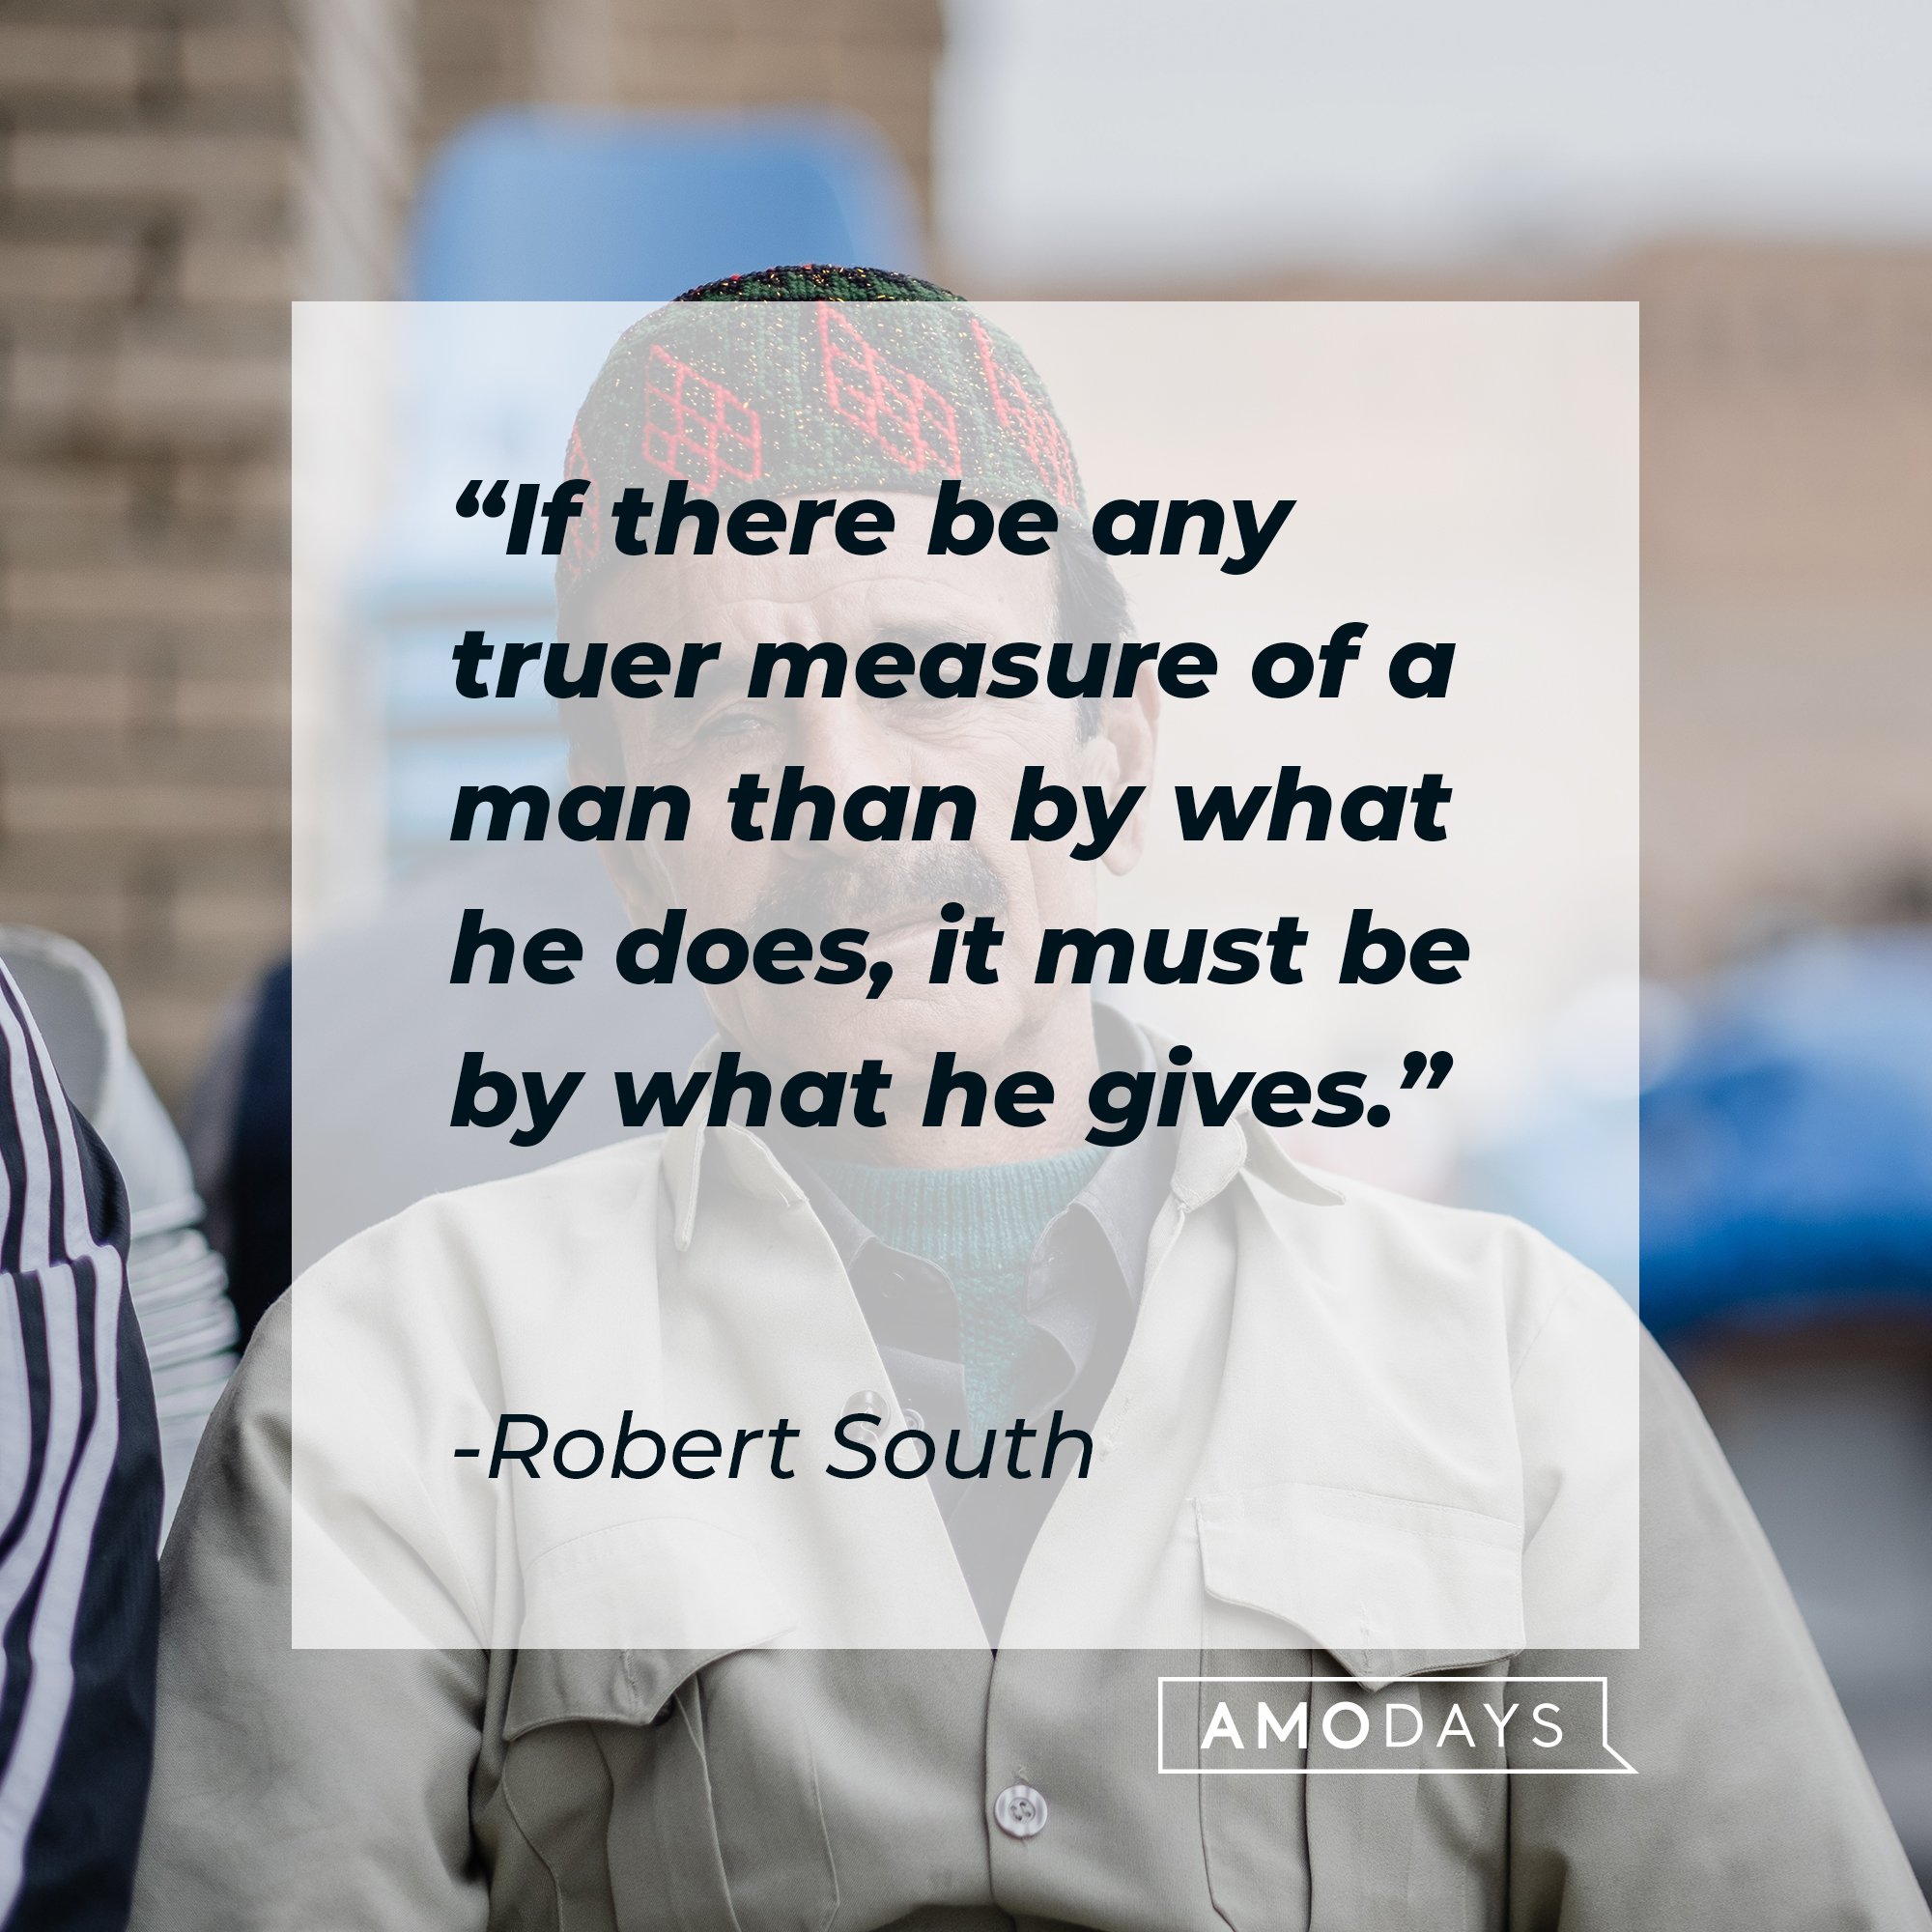 Robert South’s quote: "If there be any truer measure of a man than by what he does, it must be by what he gives." | Image: AmoDays